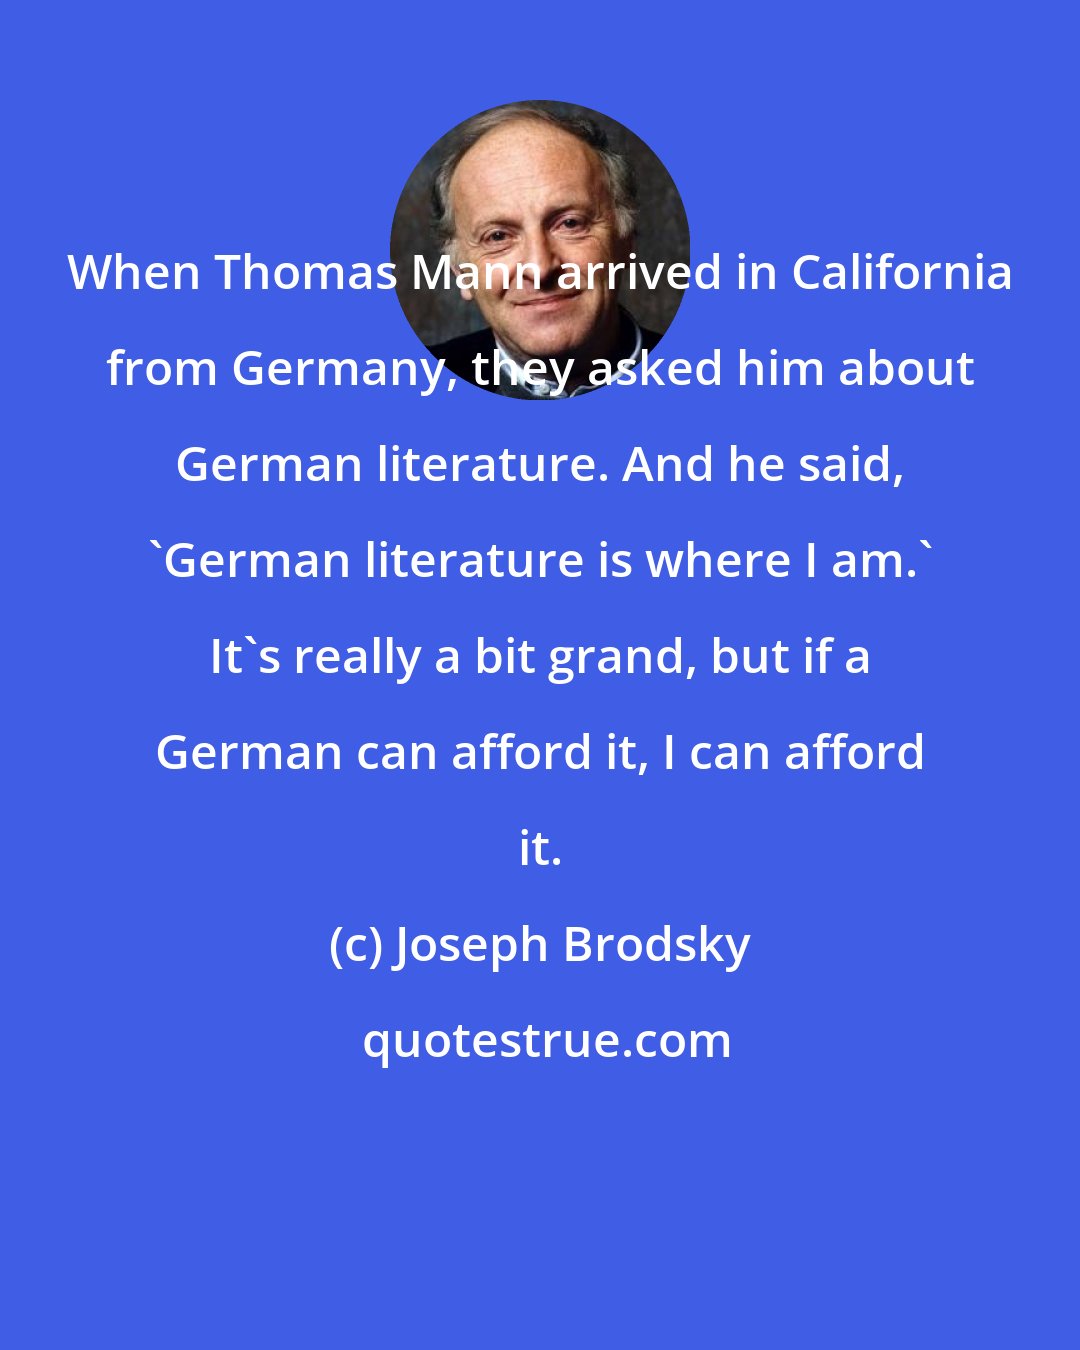 Joseph Brodsky: When Thomas Mann arrived in California from Germany, they asked him about German literature. And he said, 'German literature is where I am.' It's really a bit grand, but if a German can afford it, I can afford it.